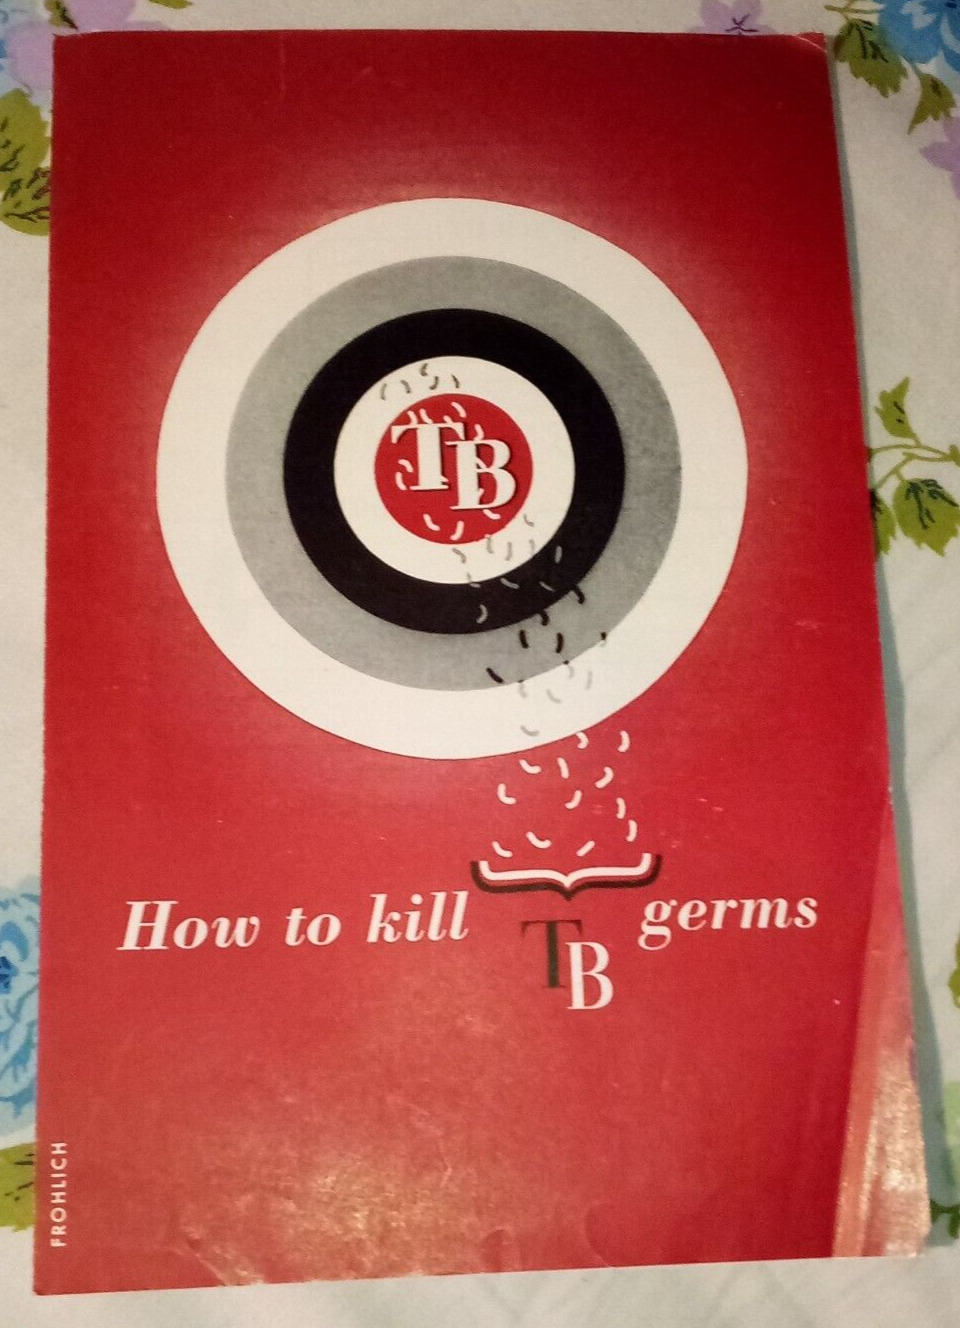 Vintage - How to kill TB germs - National Tuberculosis Association